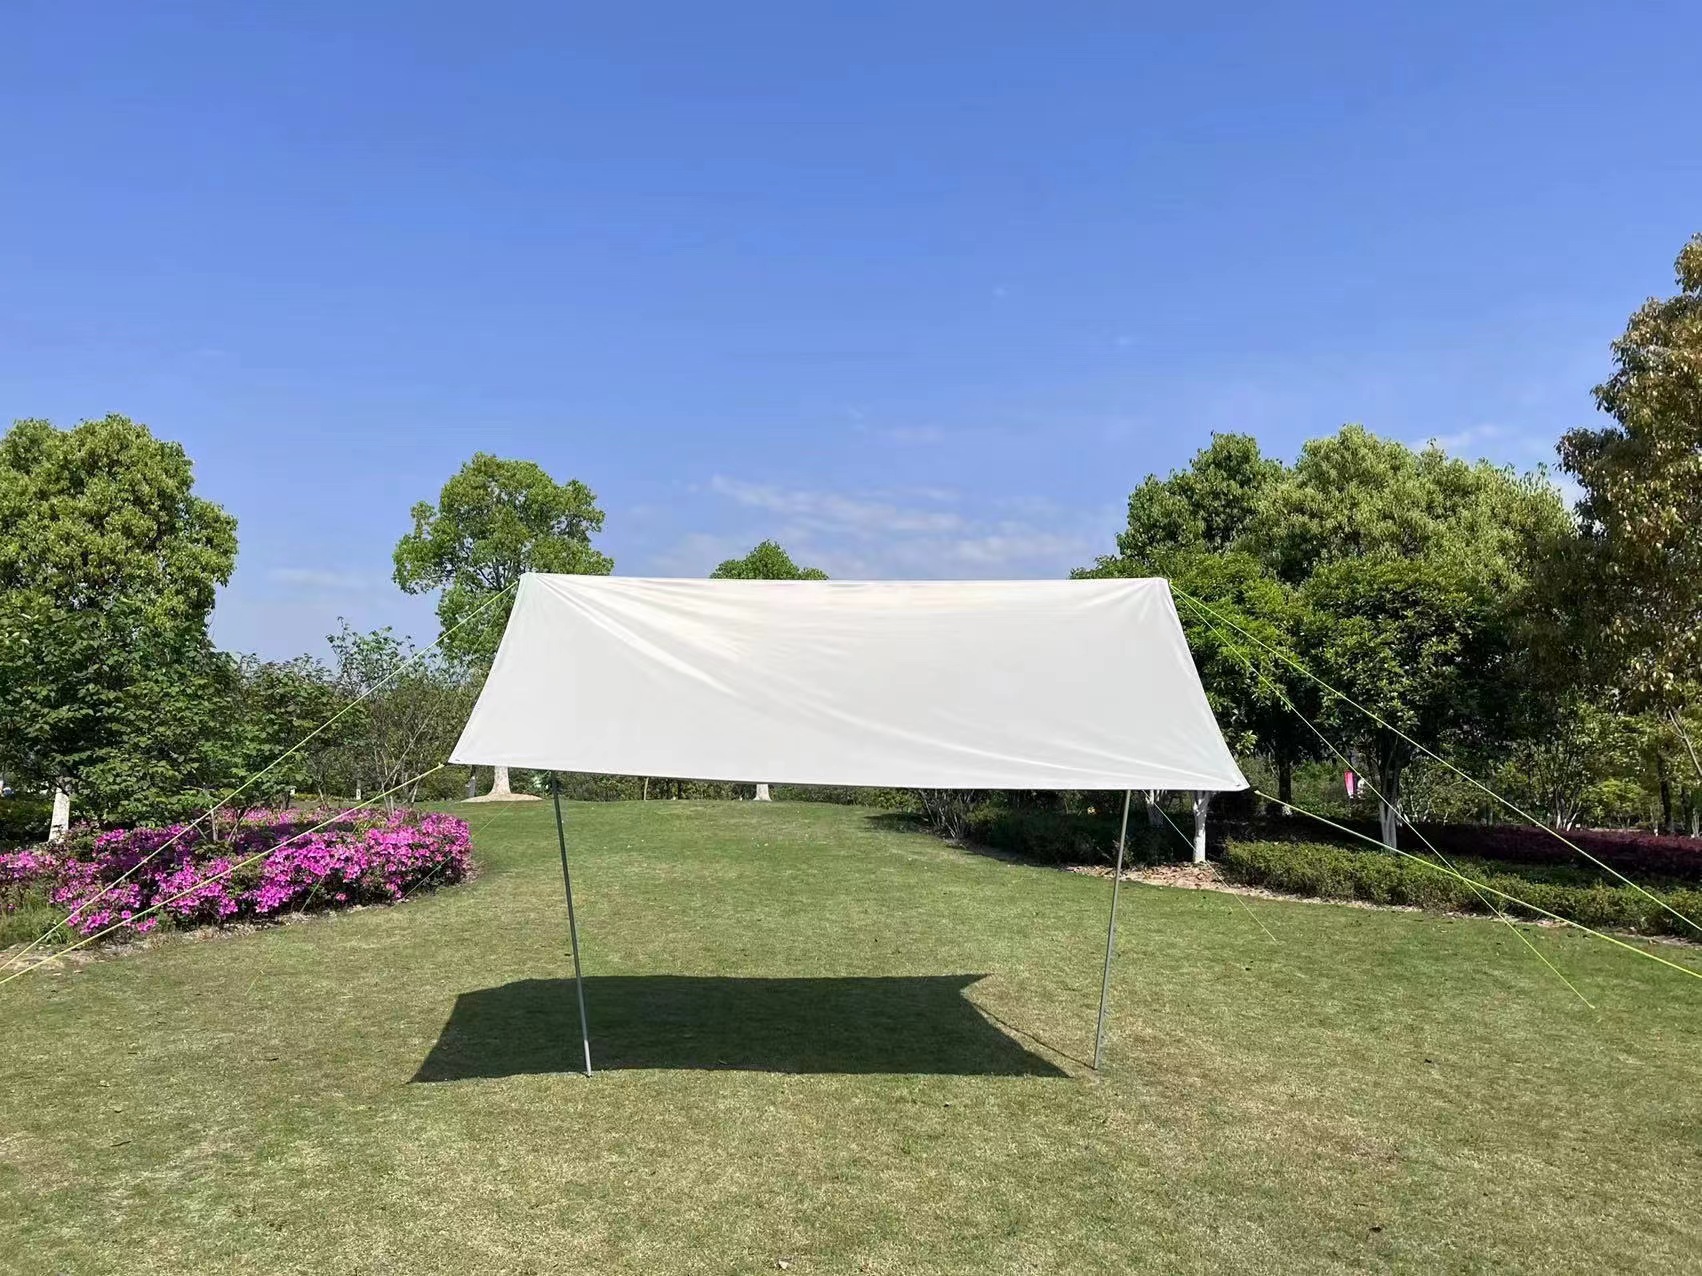 Outdoor Canopy Waterproof and Sun Protection UV Protection Outdoor Multi-Person Camping Camping Sunshade Pergola Large Canopy Tent